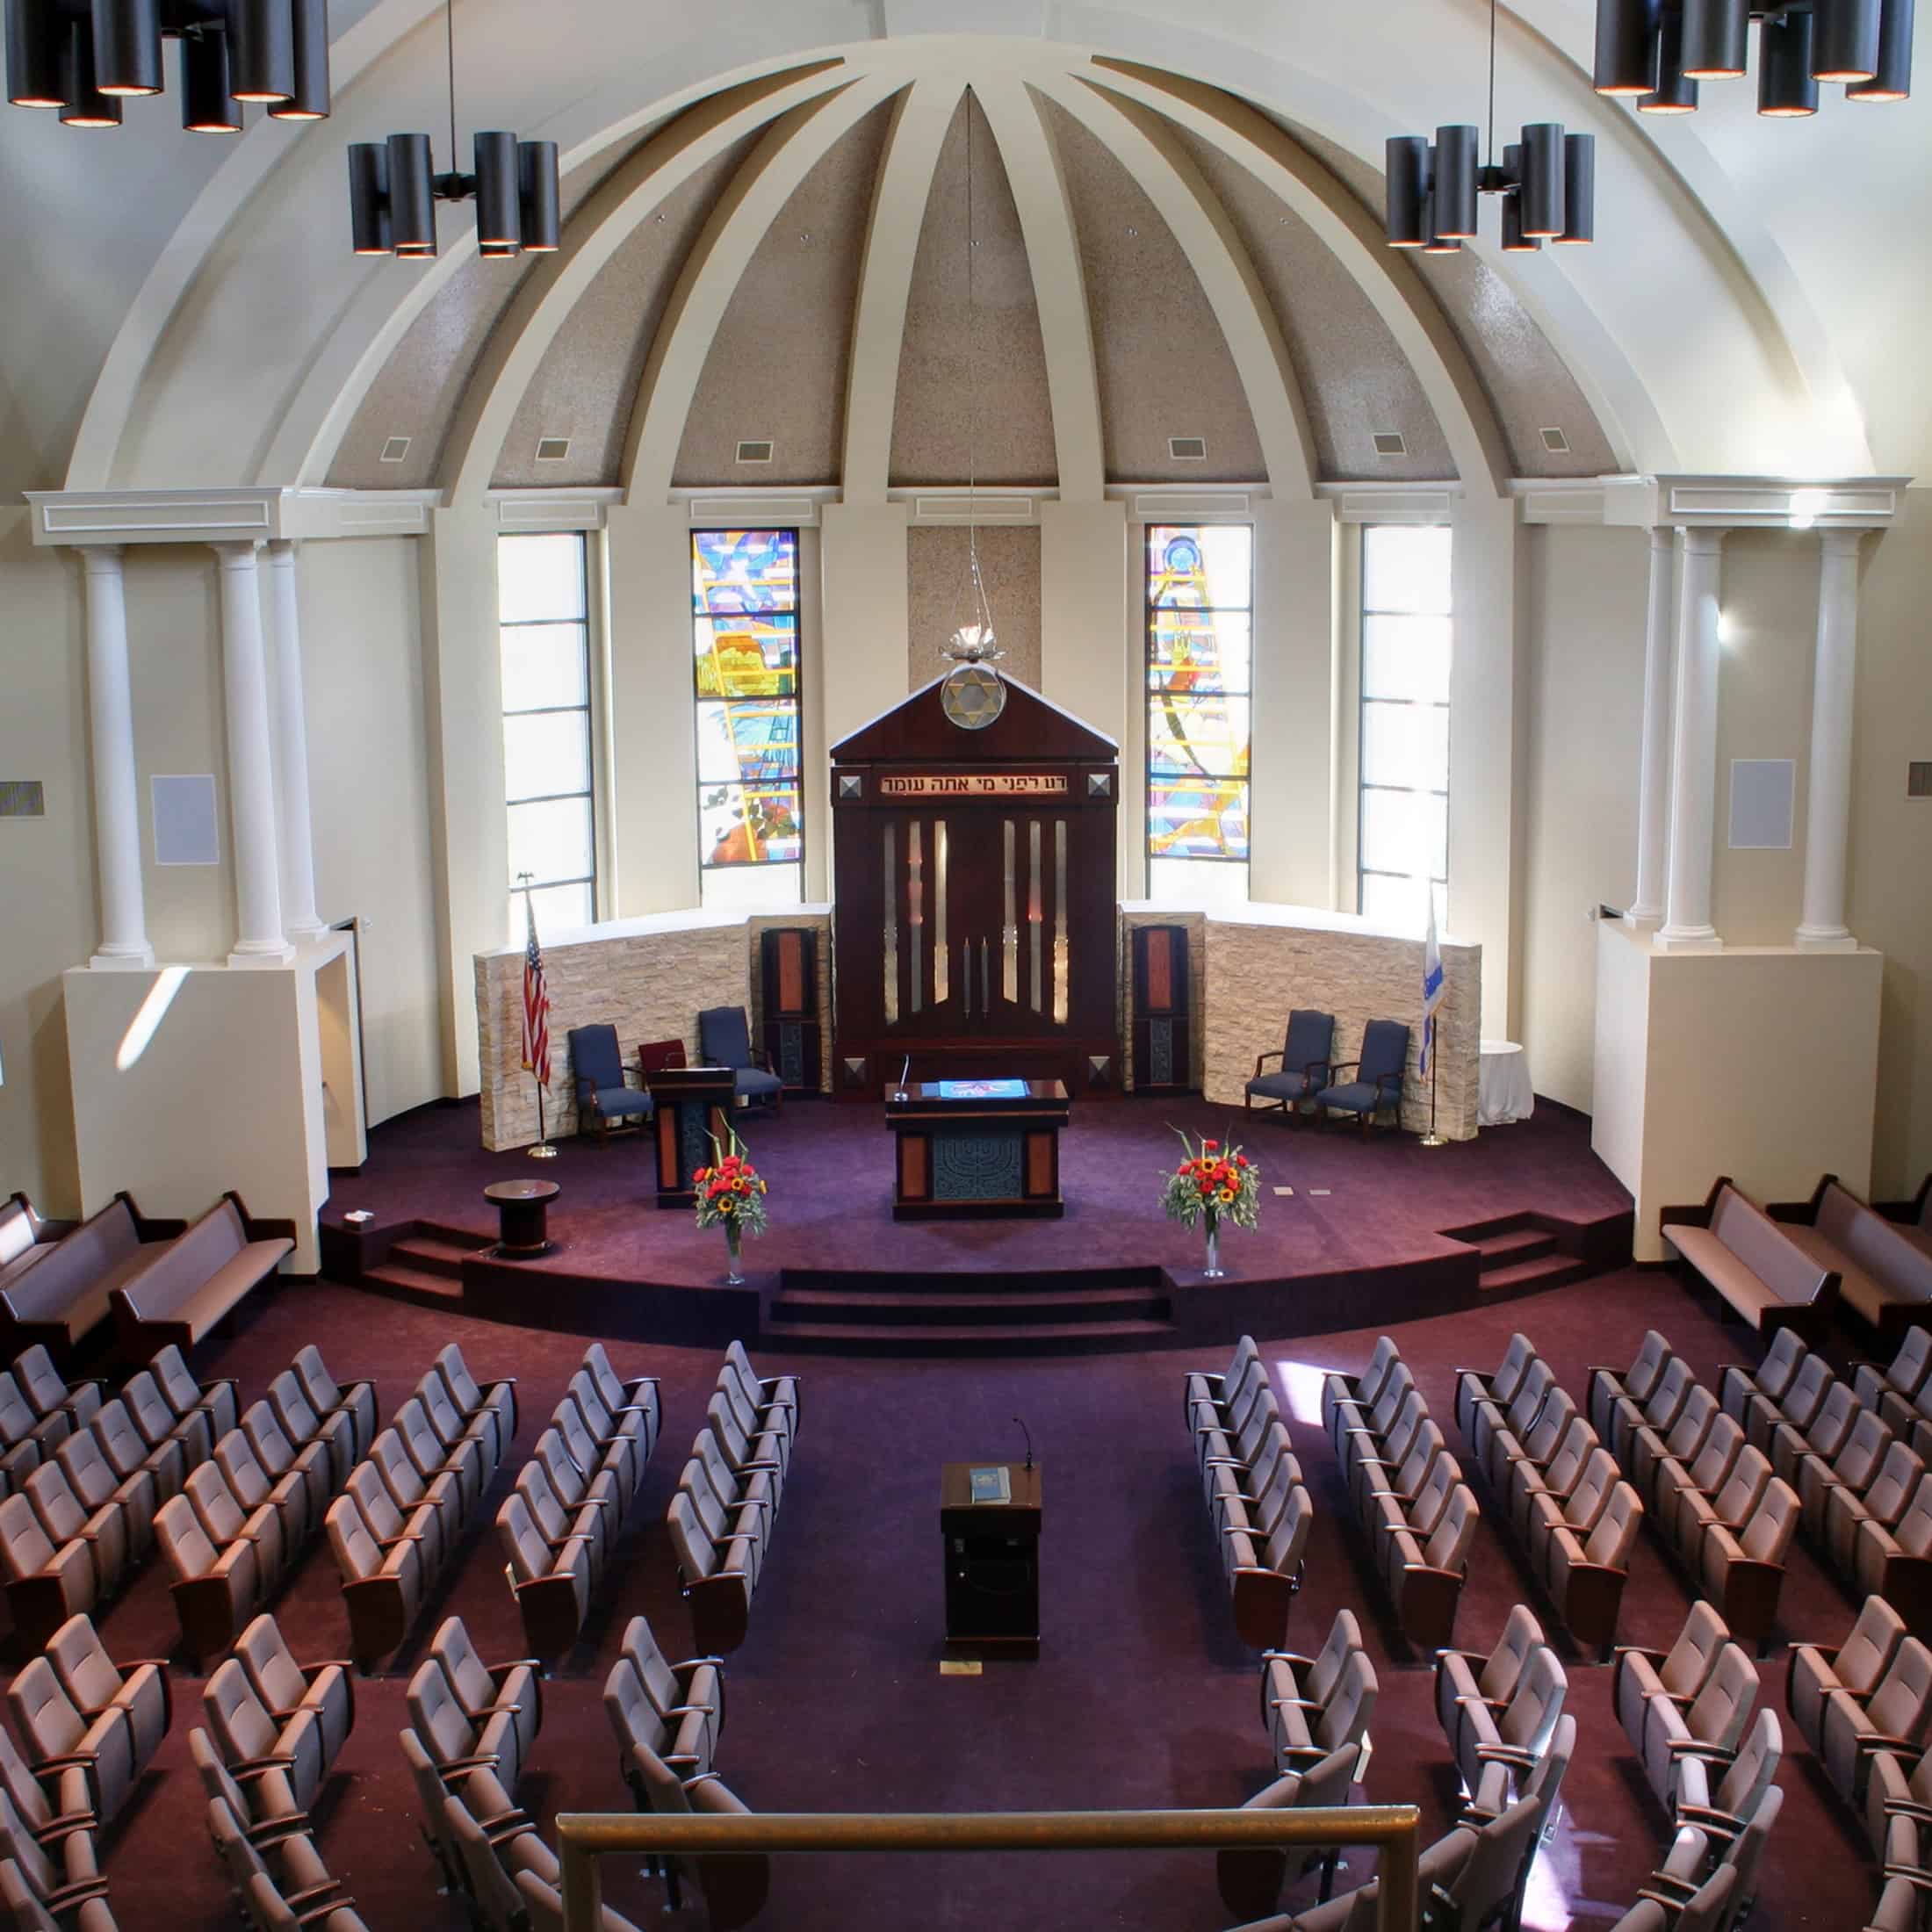 View Down from Balcony to Auditorium Seating in Congregation Anshai Torah located in Plano, TX